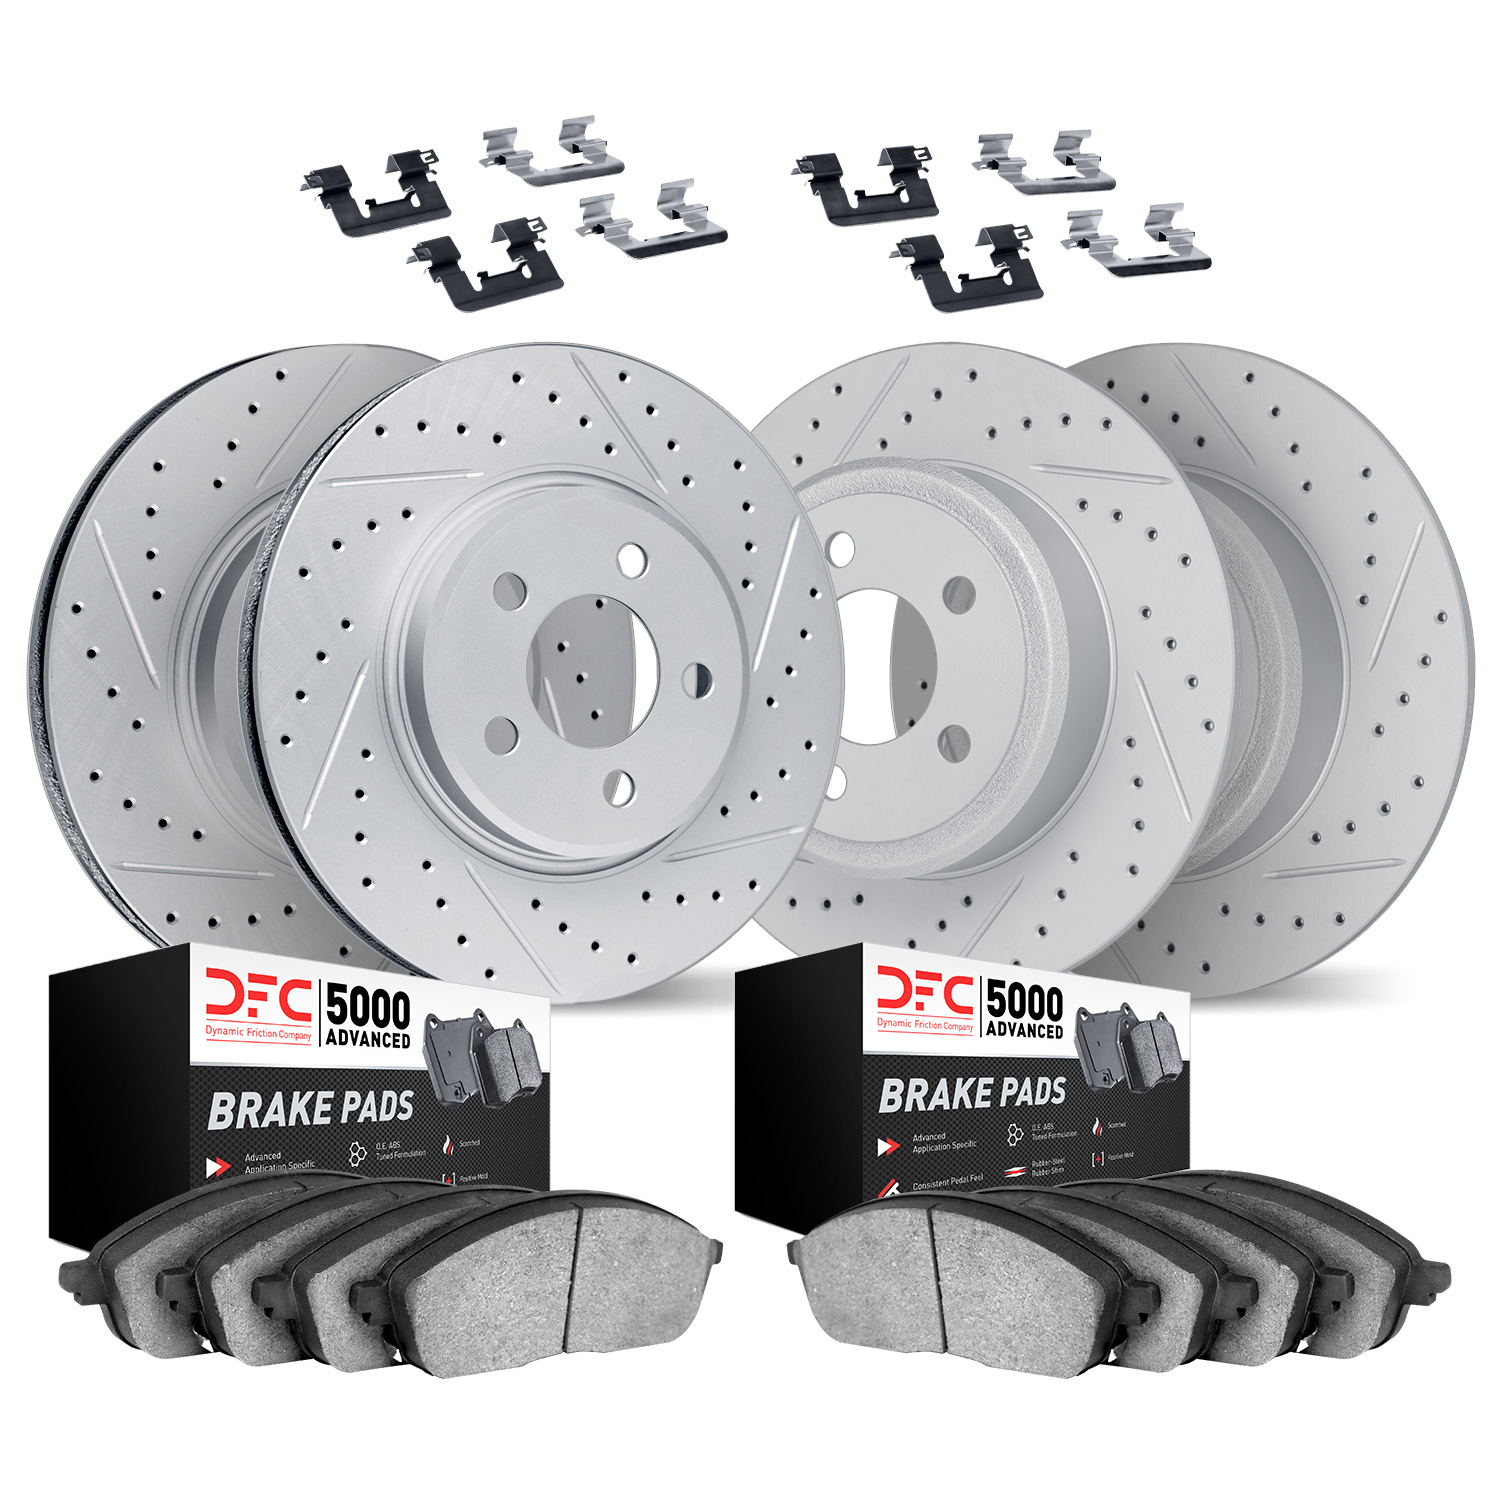 2514-39014 Geoperformance Drilled/Slotted Rotors w/5000 Advanced Brake Pads Kit & Hardware, 2016-2016 Mopar, Position: Front and